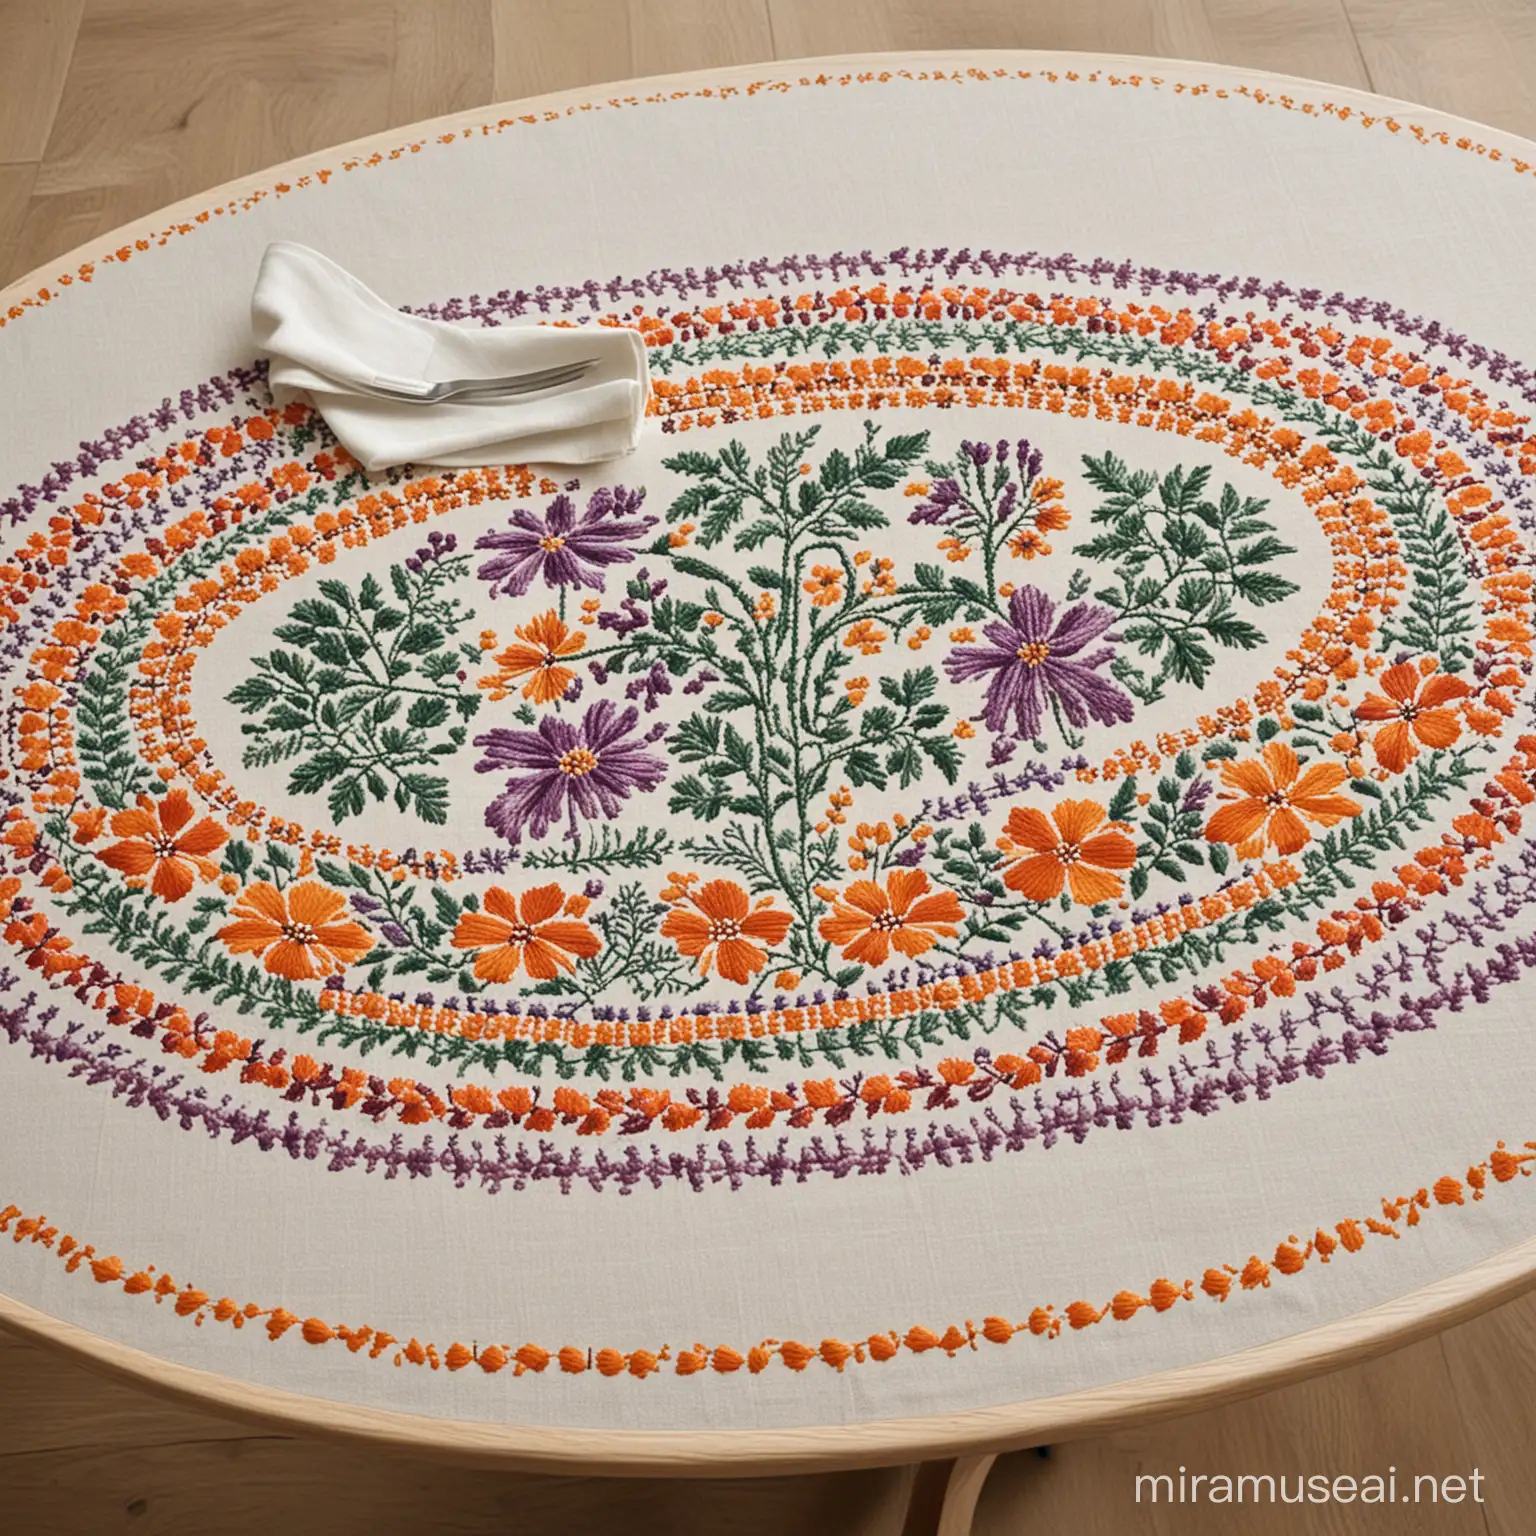 HandEmbroidered Folk Pattern on Oval Table in Vibrant Secondary Colors